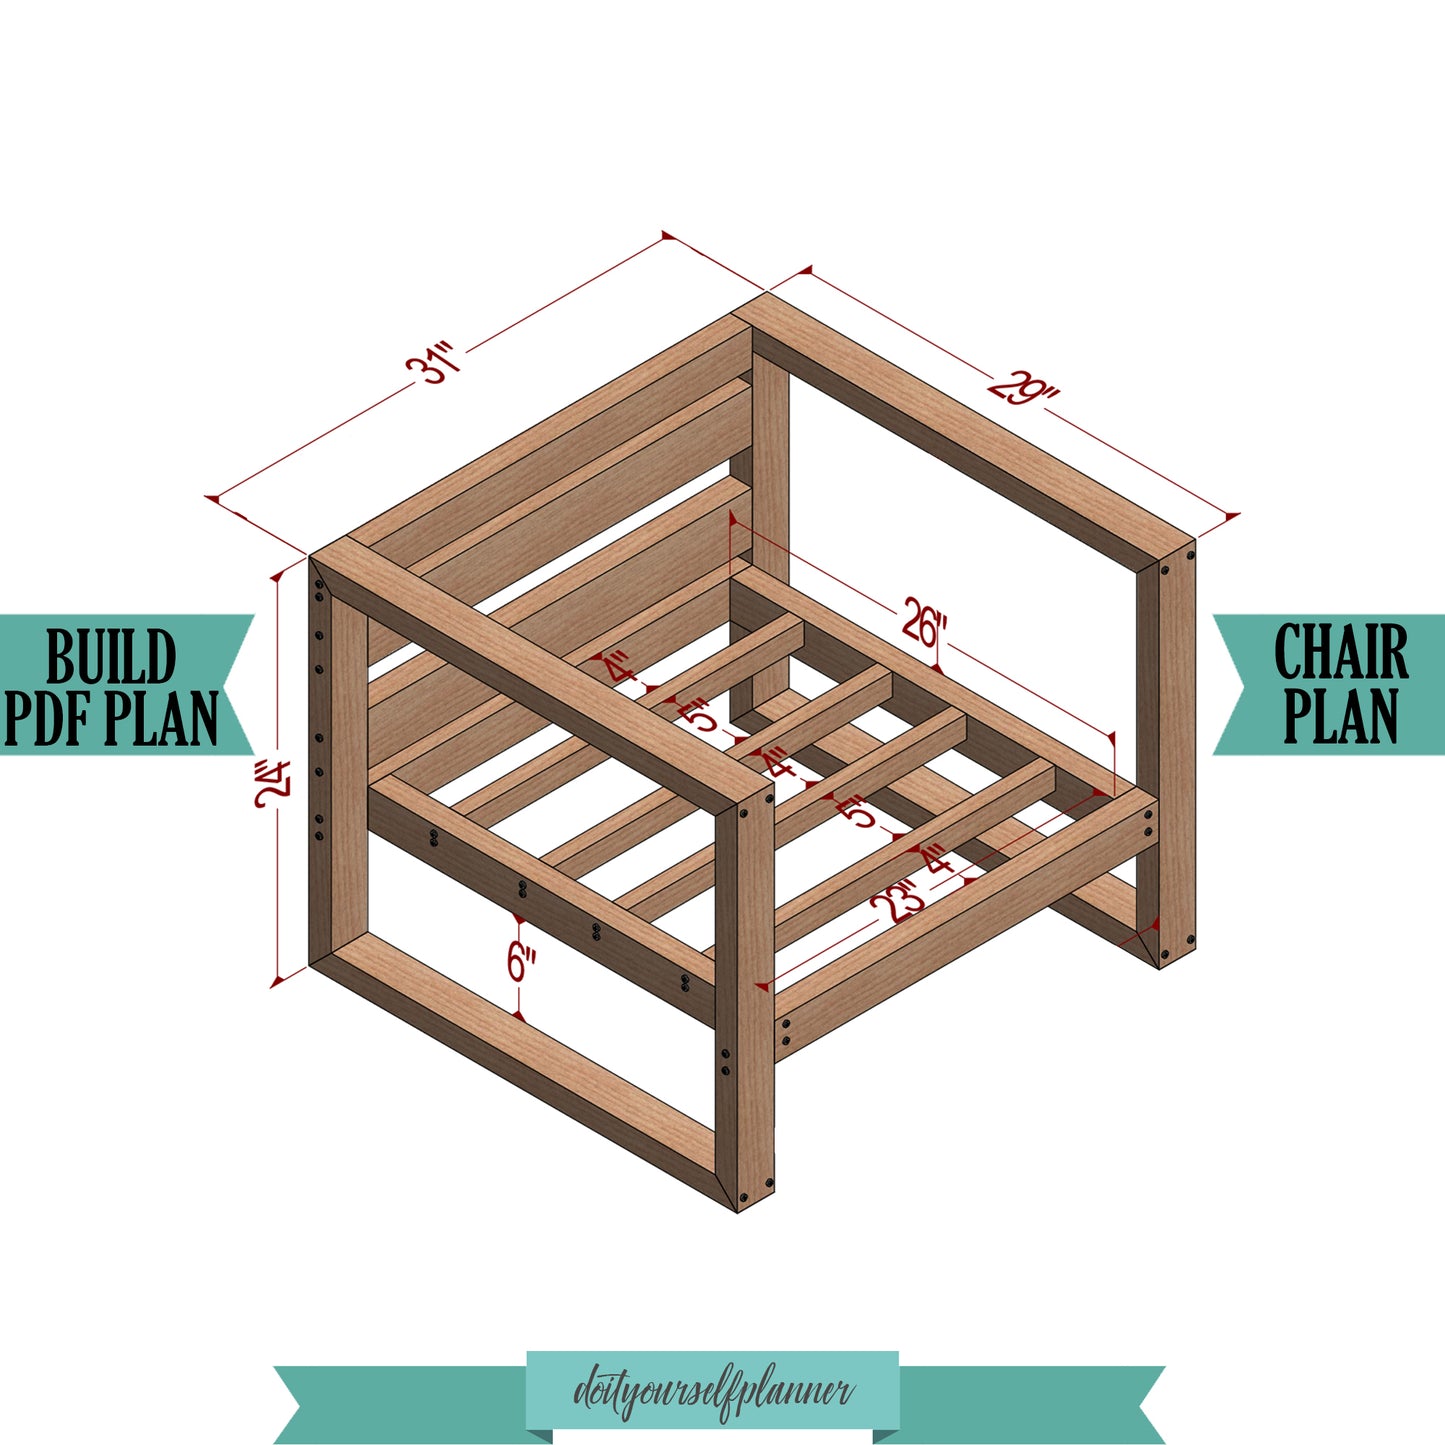 Wooden Chair plan, PDF chair plans, Woodworking plans for chair